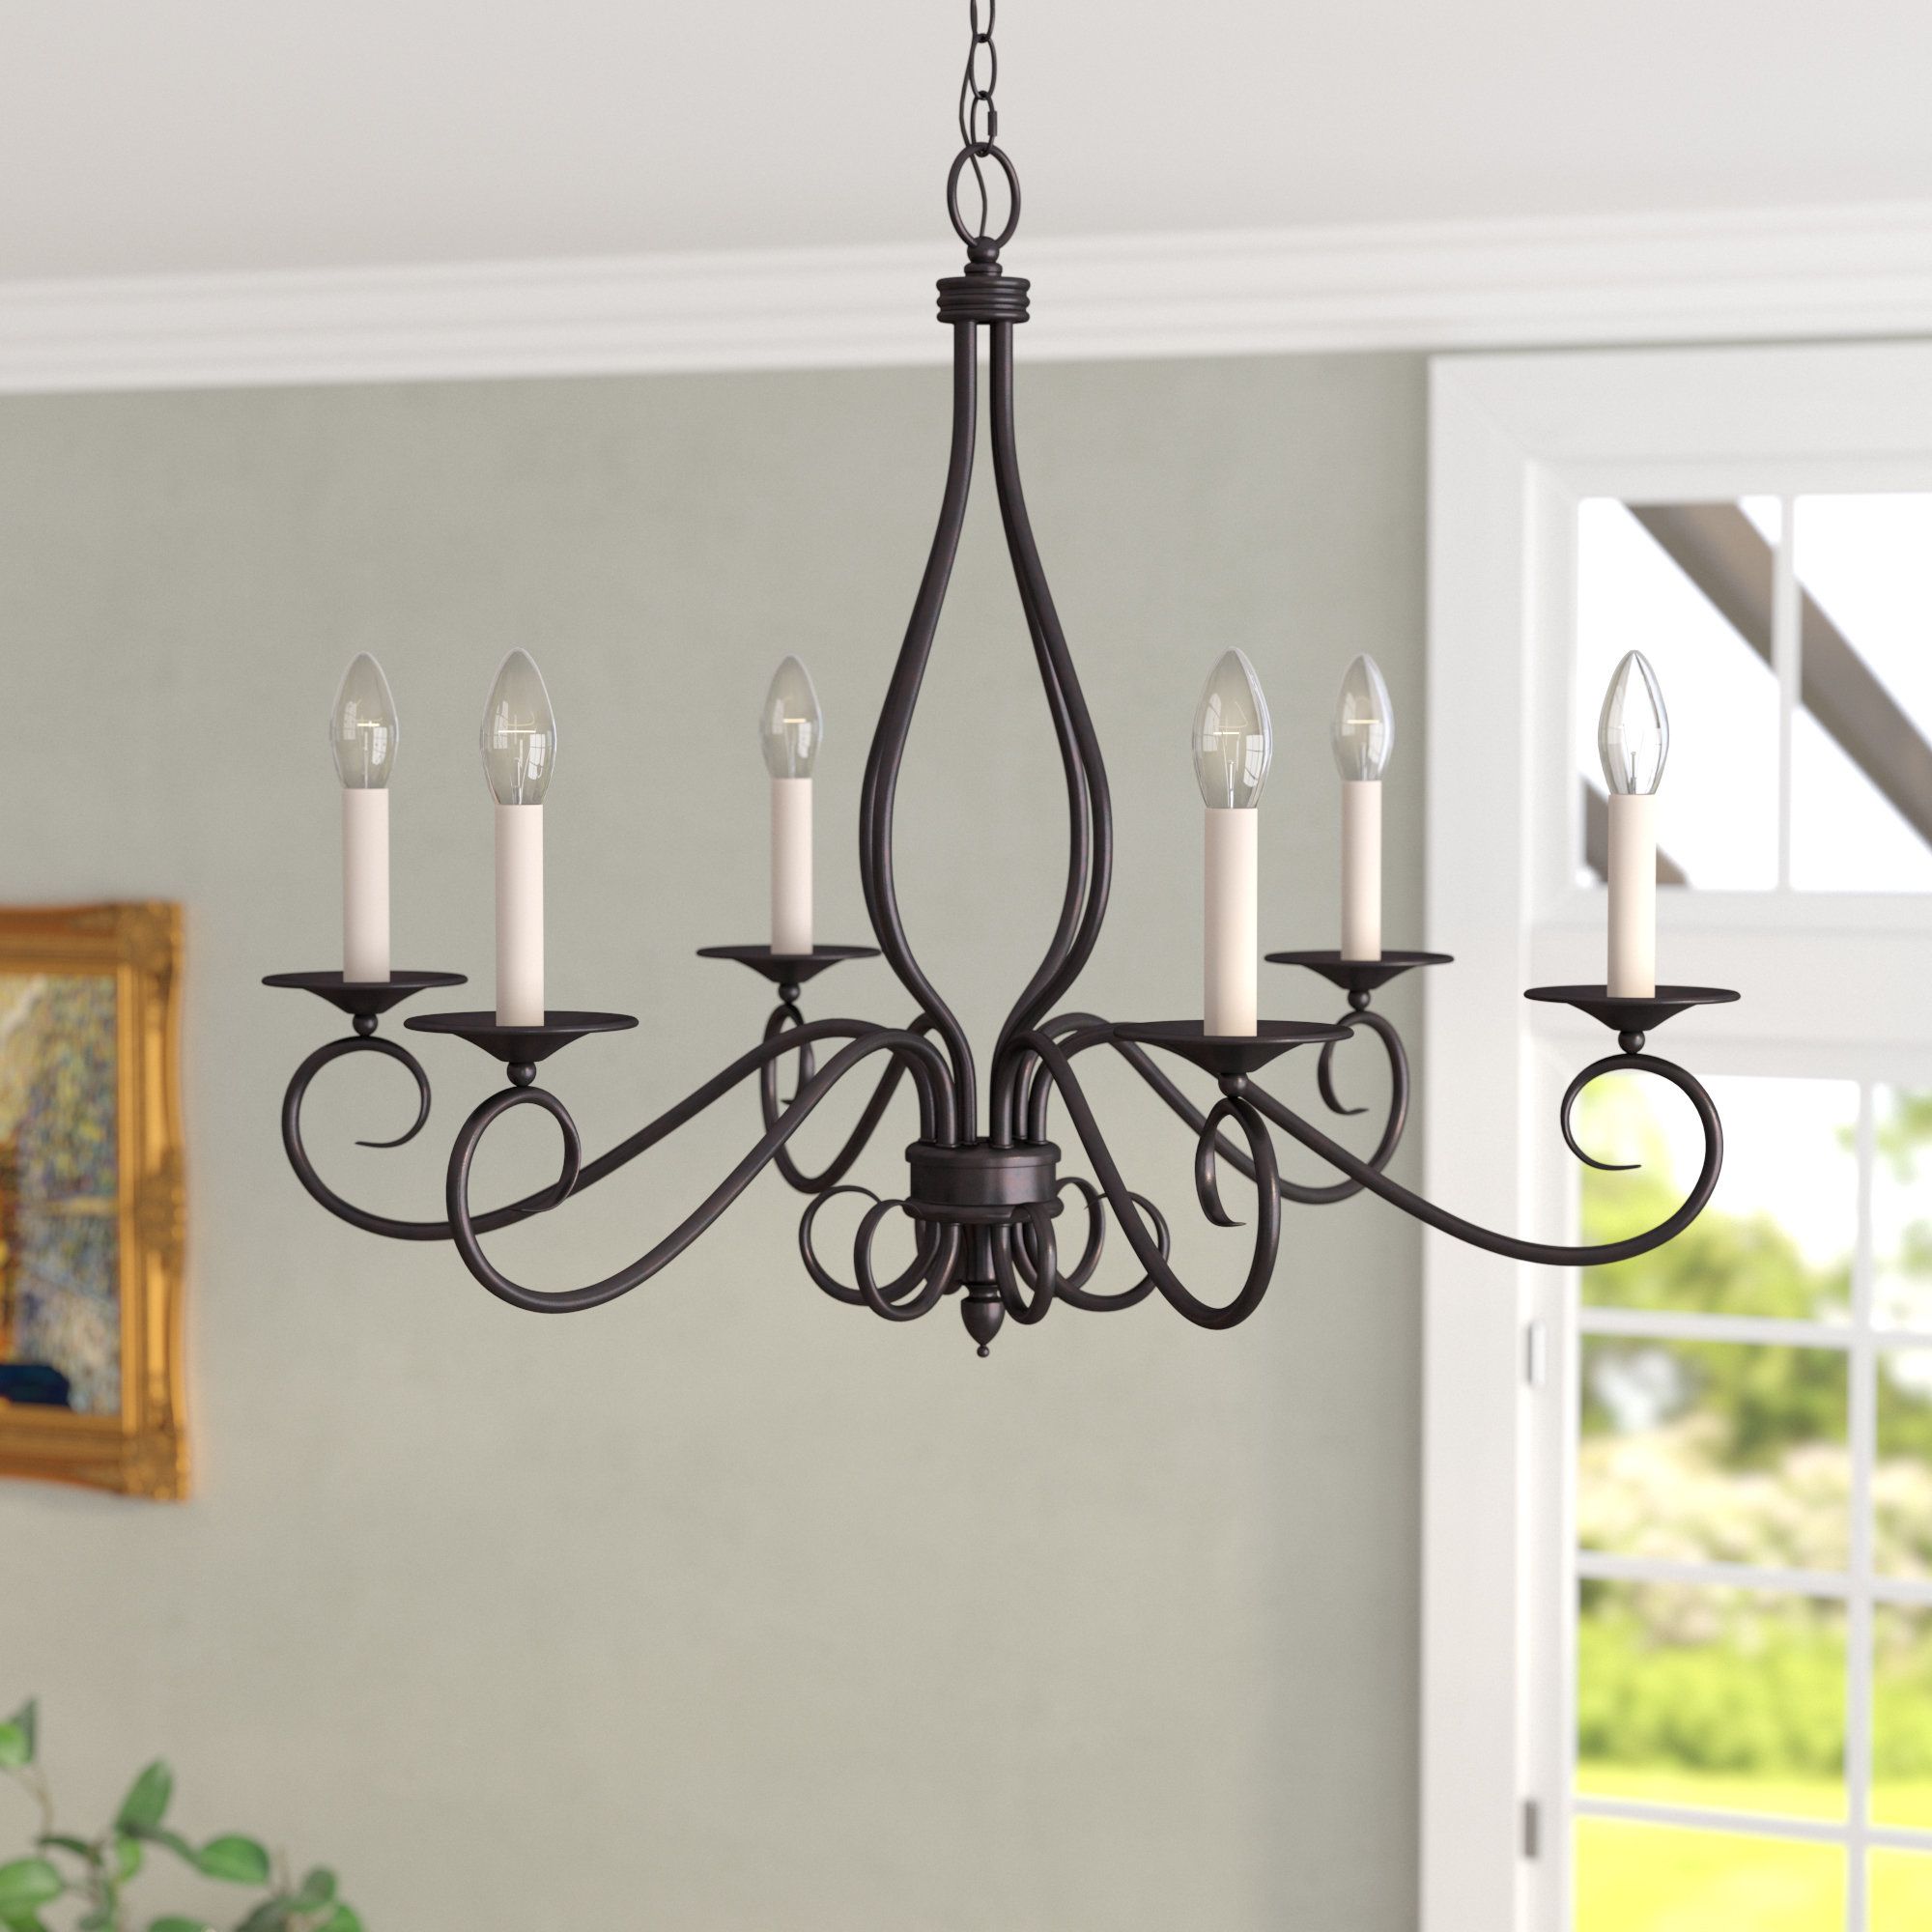 Ingles 6 Light Chandelier With Regard To Diaz 6 Light Candle Style Chandeliers (View 25 of 30)